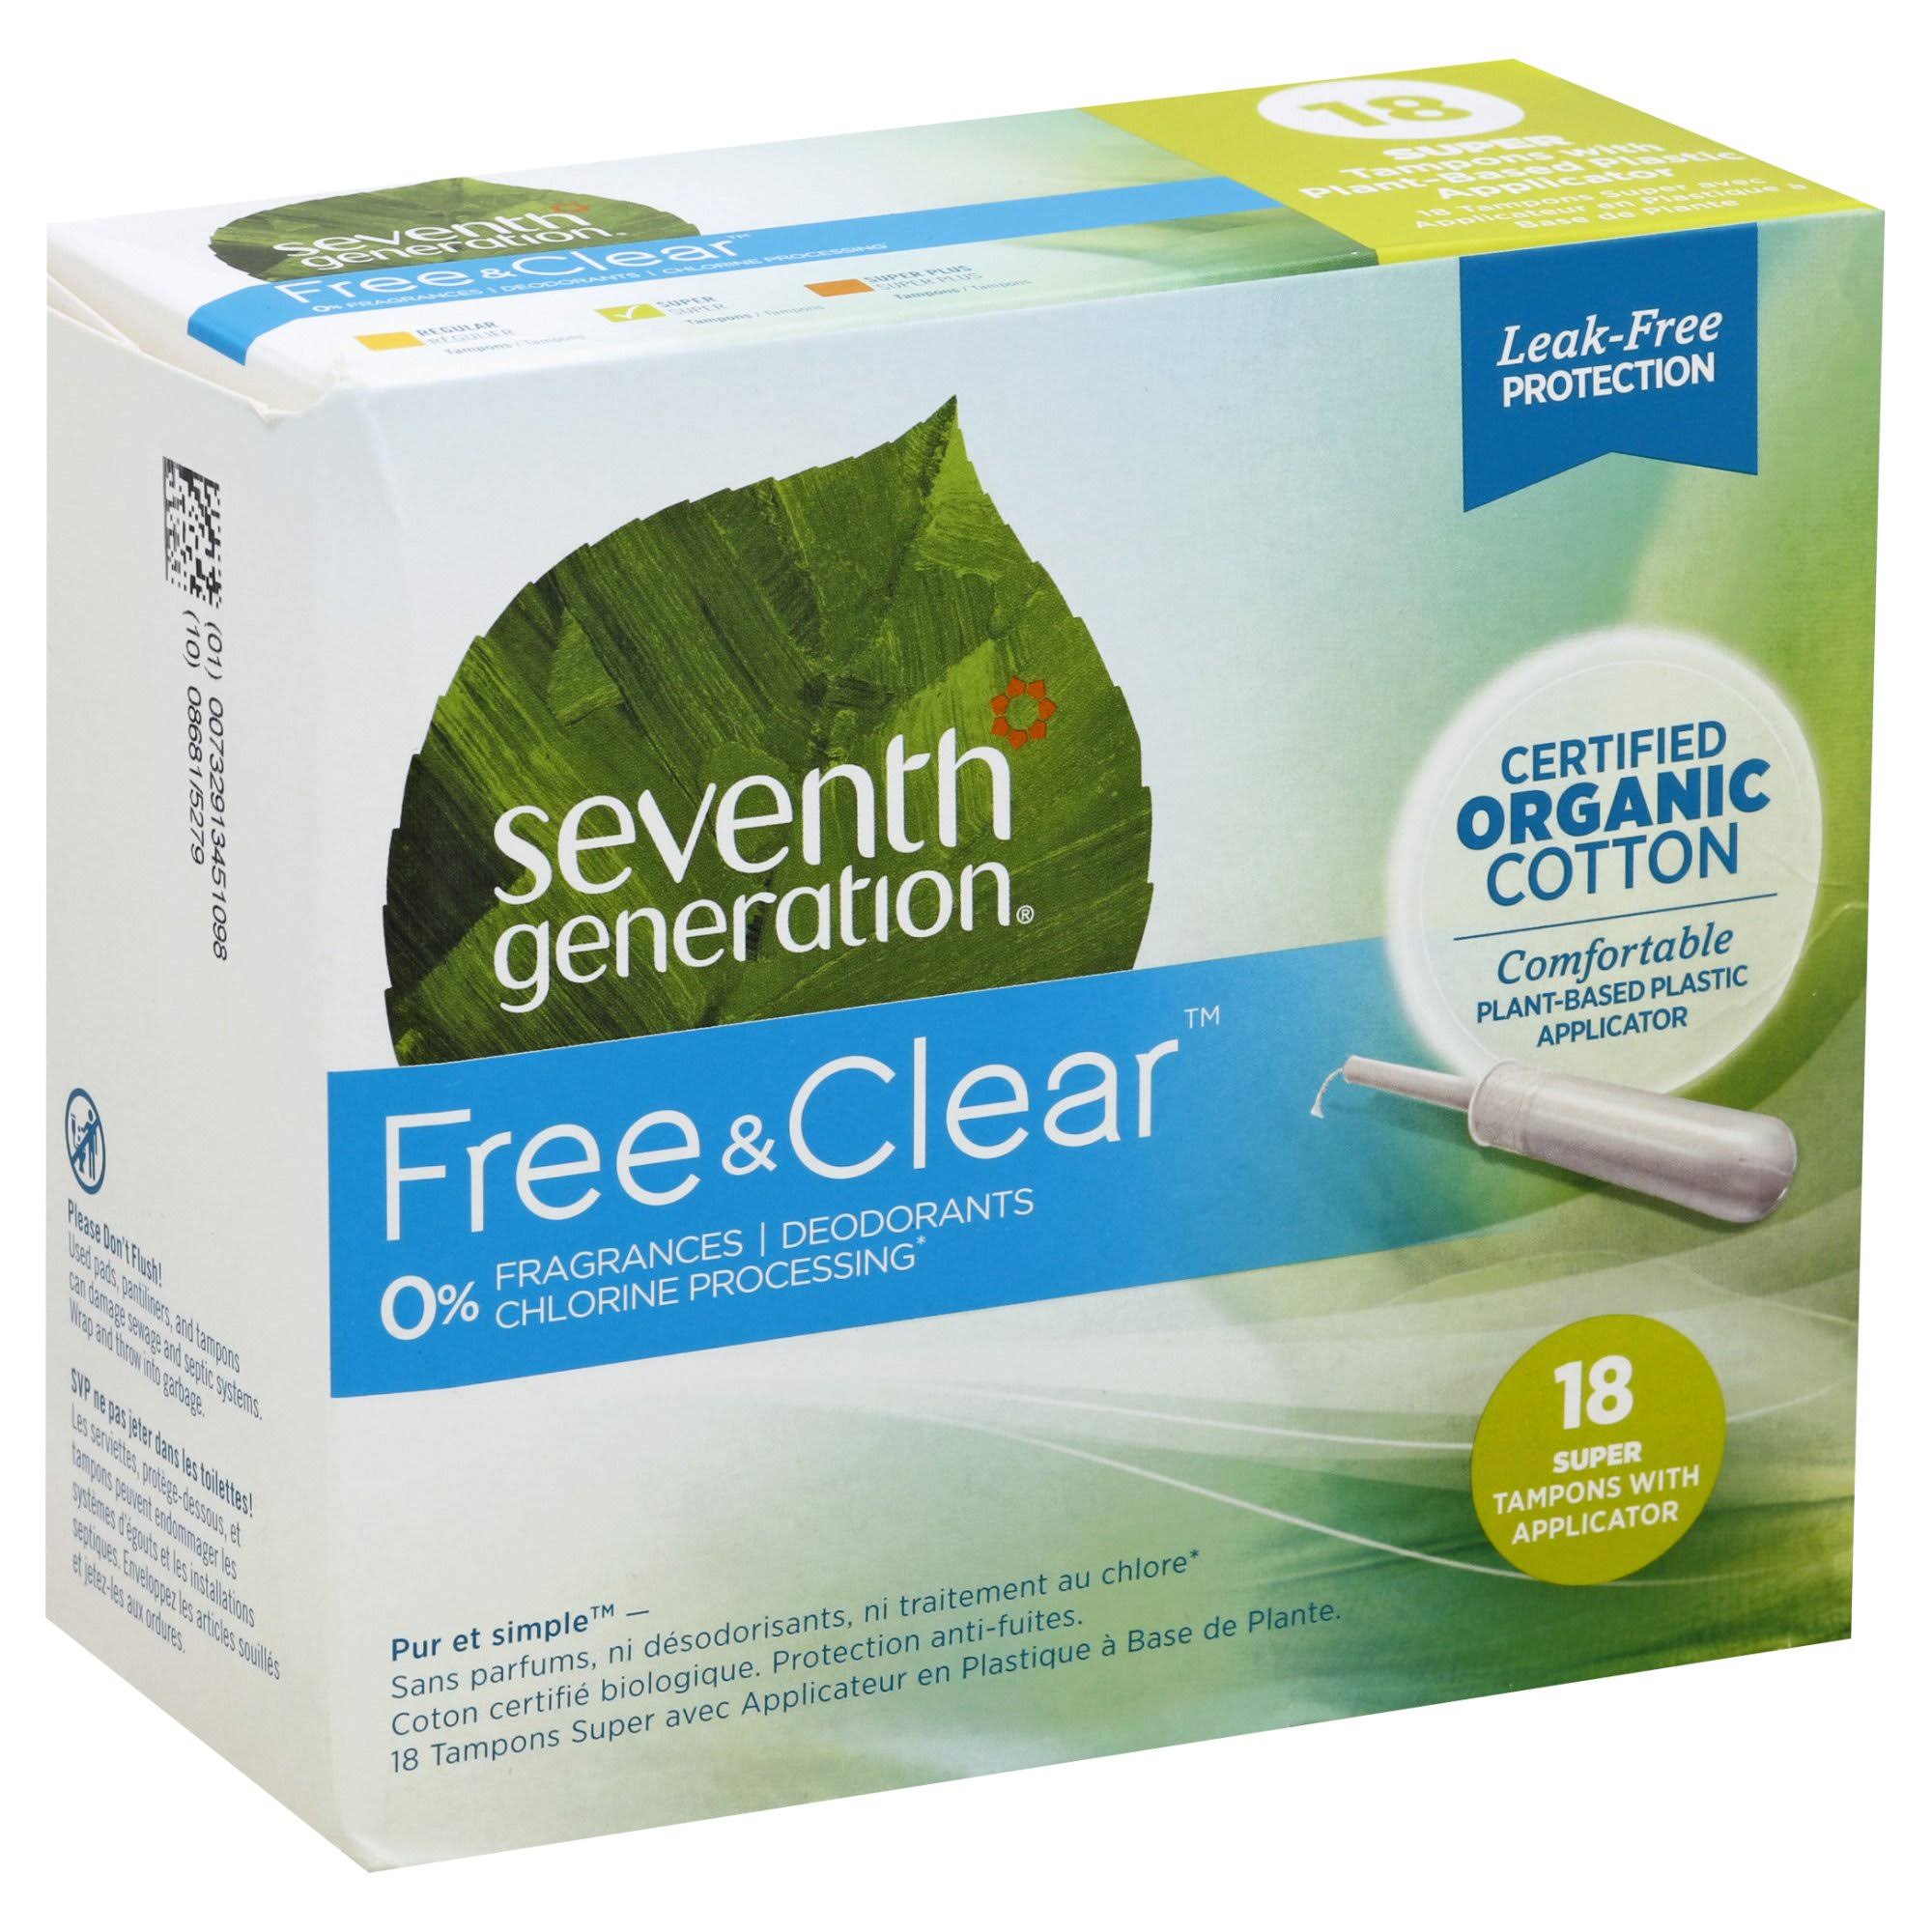 Seventh Generation Organic Cotton Tampons Super with Applicator 18 Count